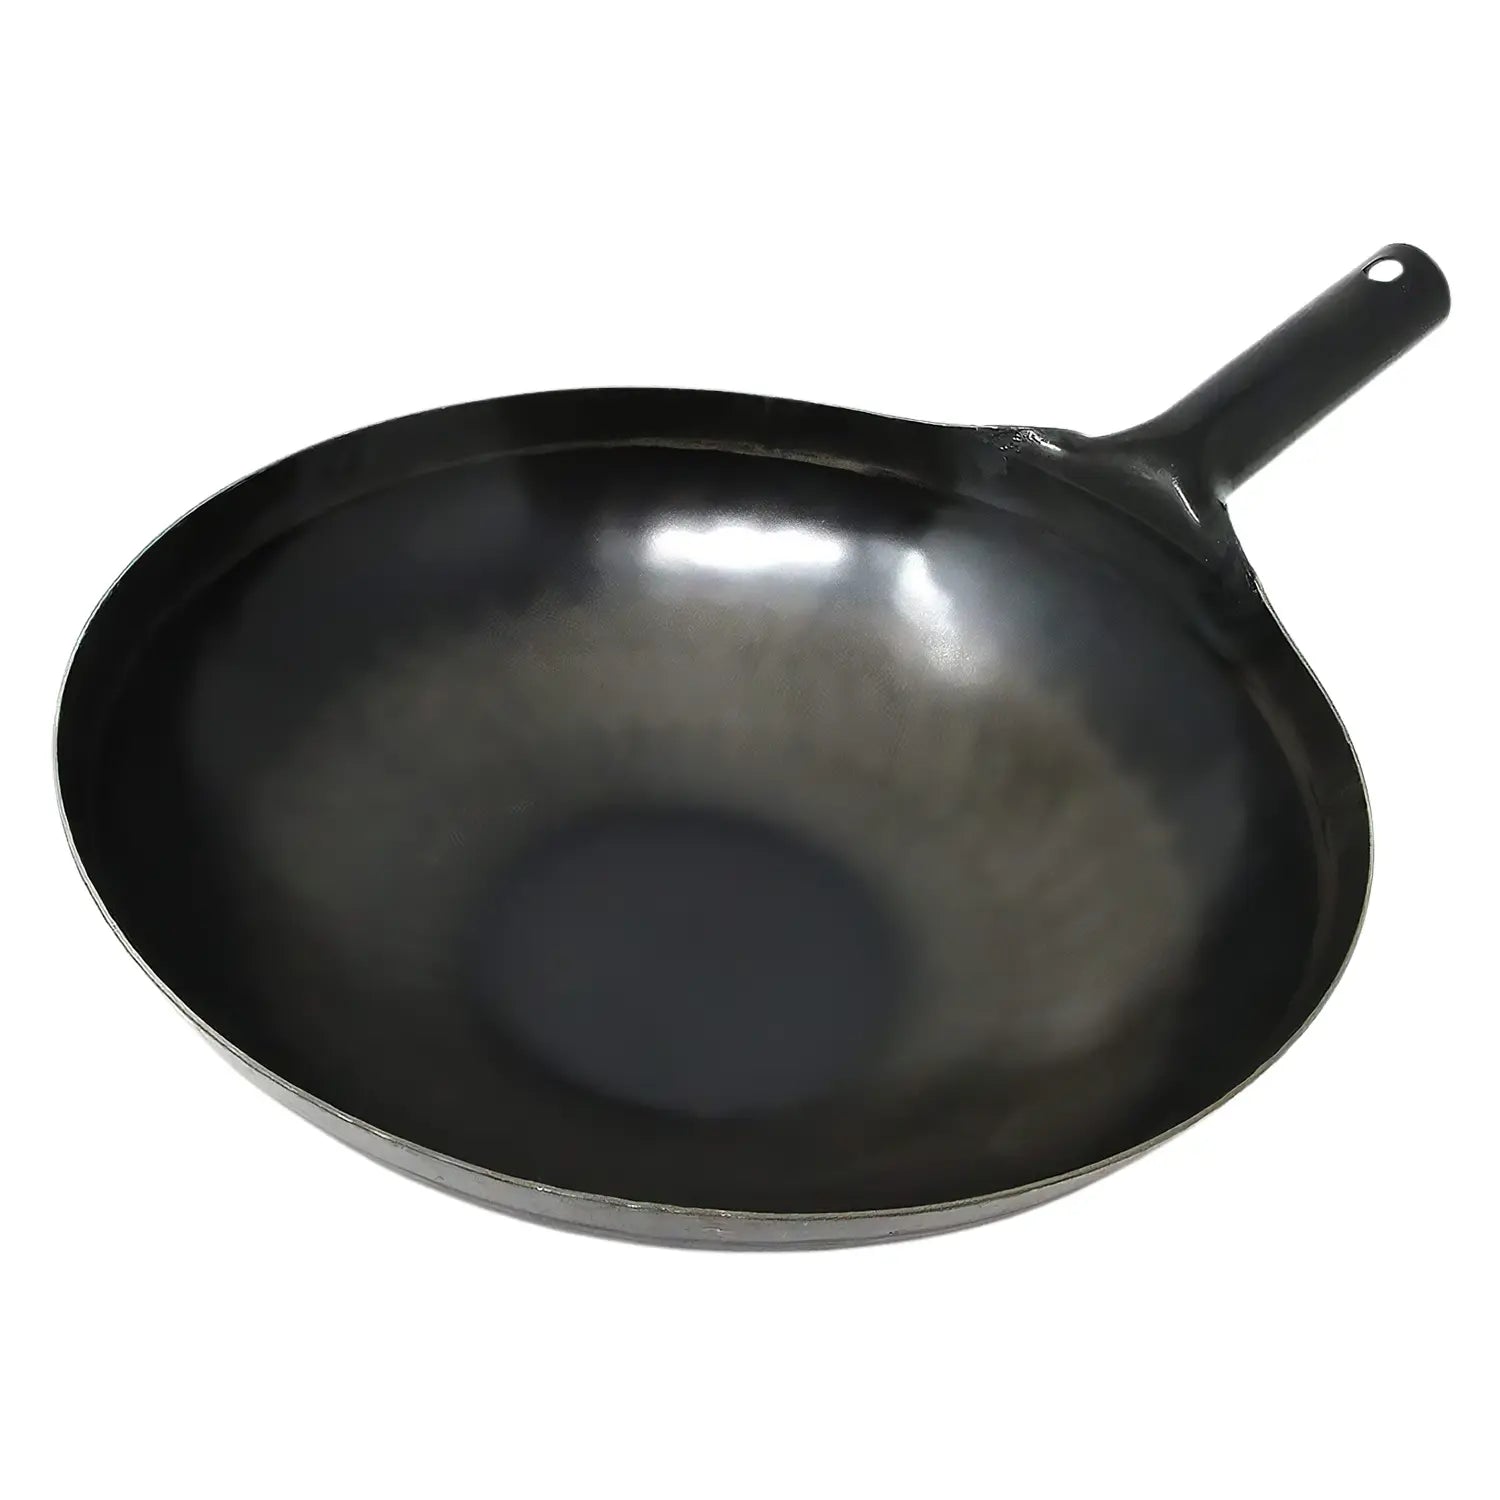 Learning from Mistakes: Wok Seasoning - My Chinese Home Kitchen